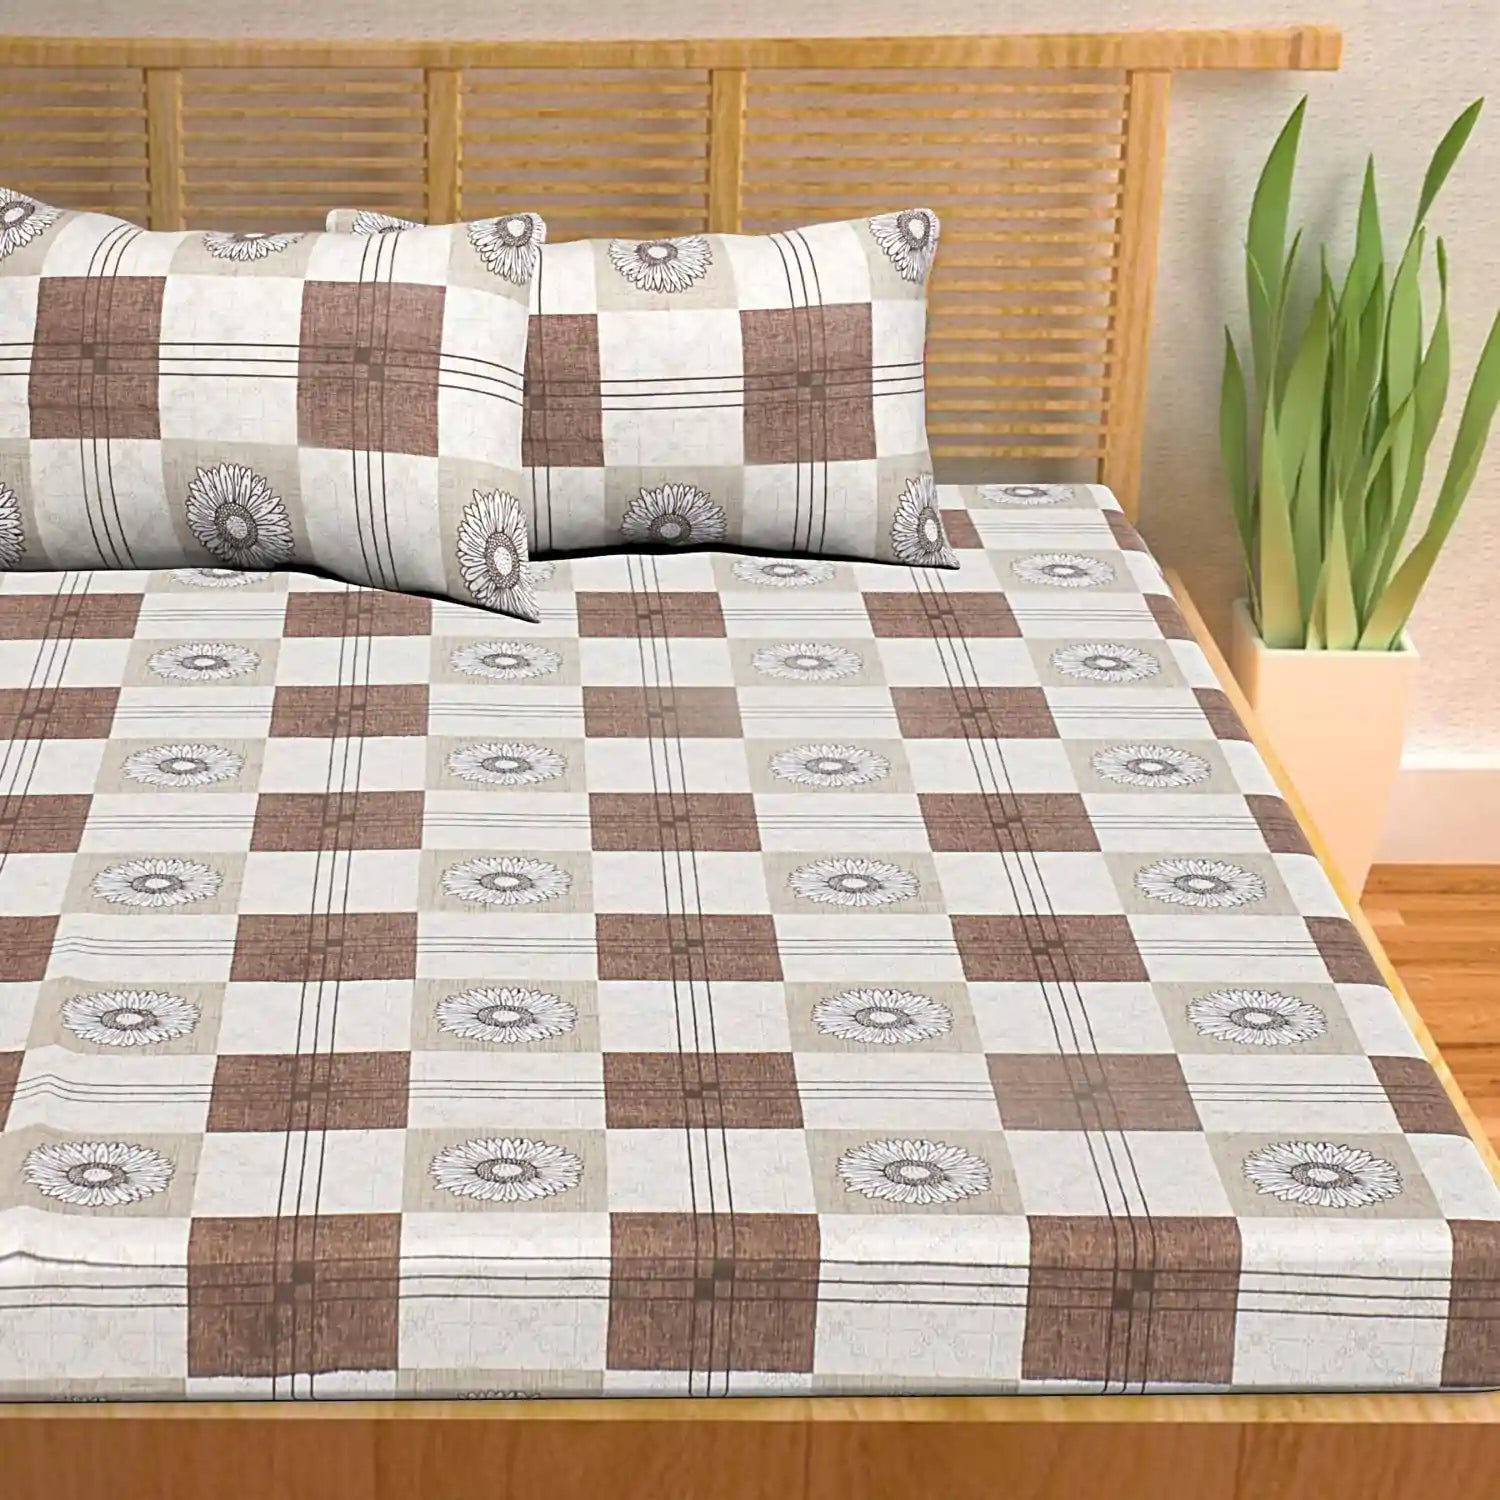 king size bed sheets cotton